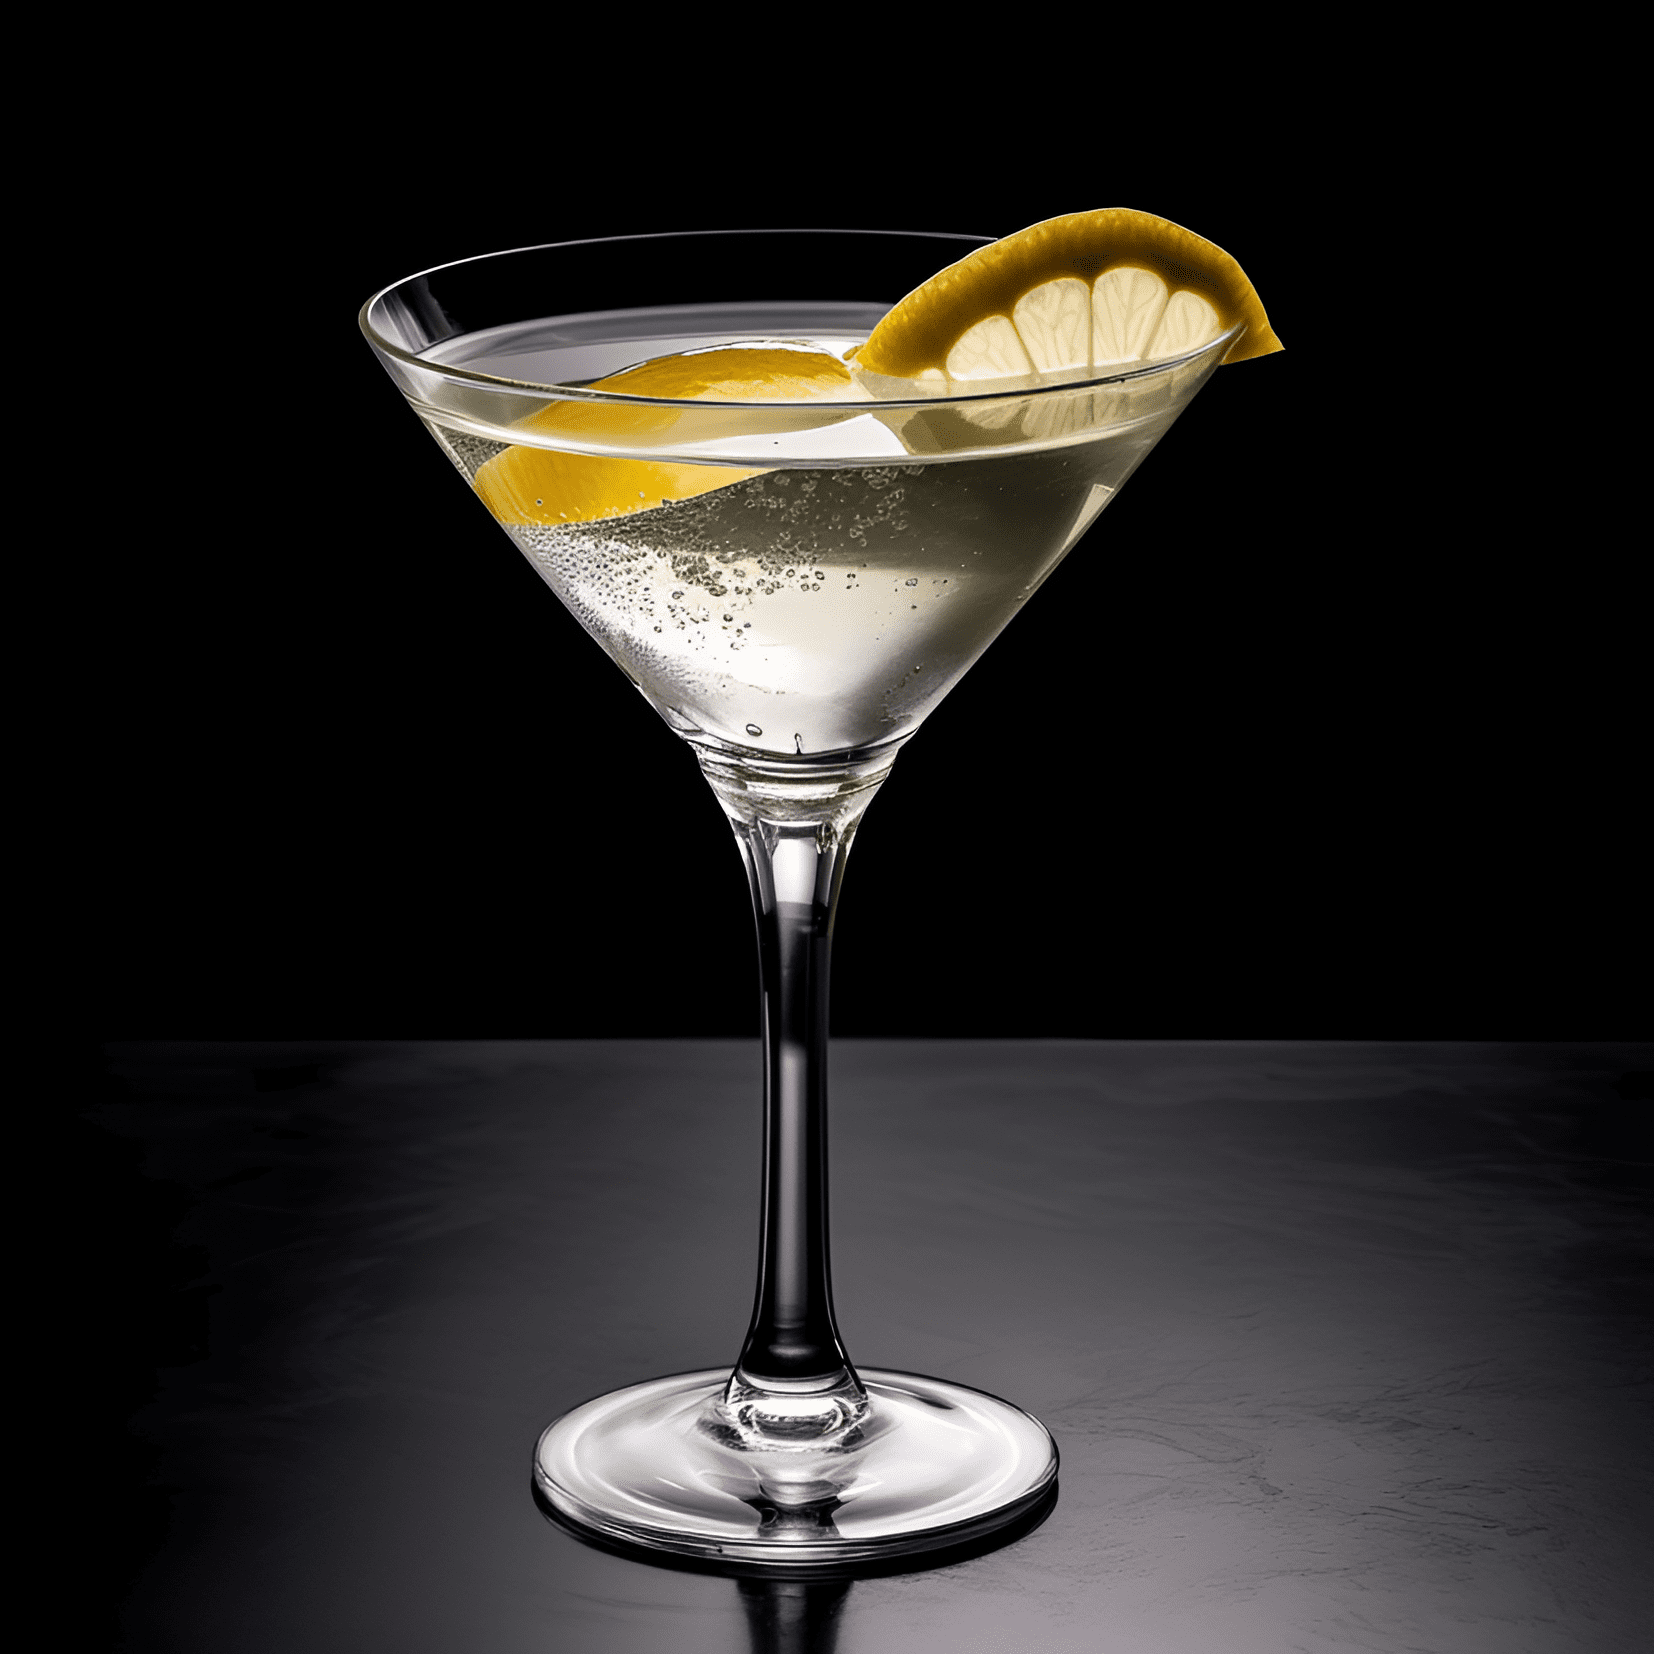 Fifty-Fifty Cocktail Recipe - The Fifty-Fifty cocktail has a balanced, smooth, and slightly herbal taste. It is not too sweet, nor too dry, making it a perfect middle ground between the classic Martini and sweeter cocktails. The gin and vermouth combine to create a complex, yet approachable flavor profile.